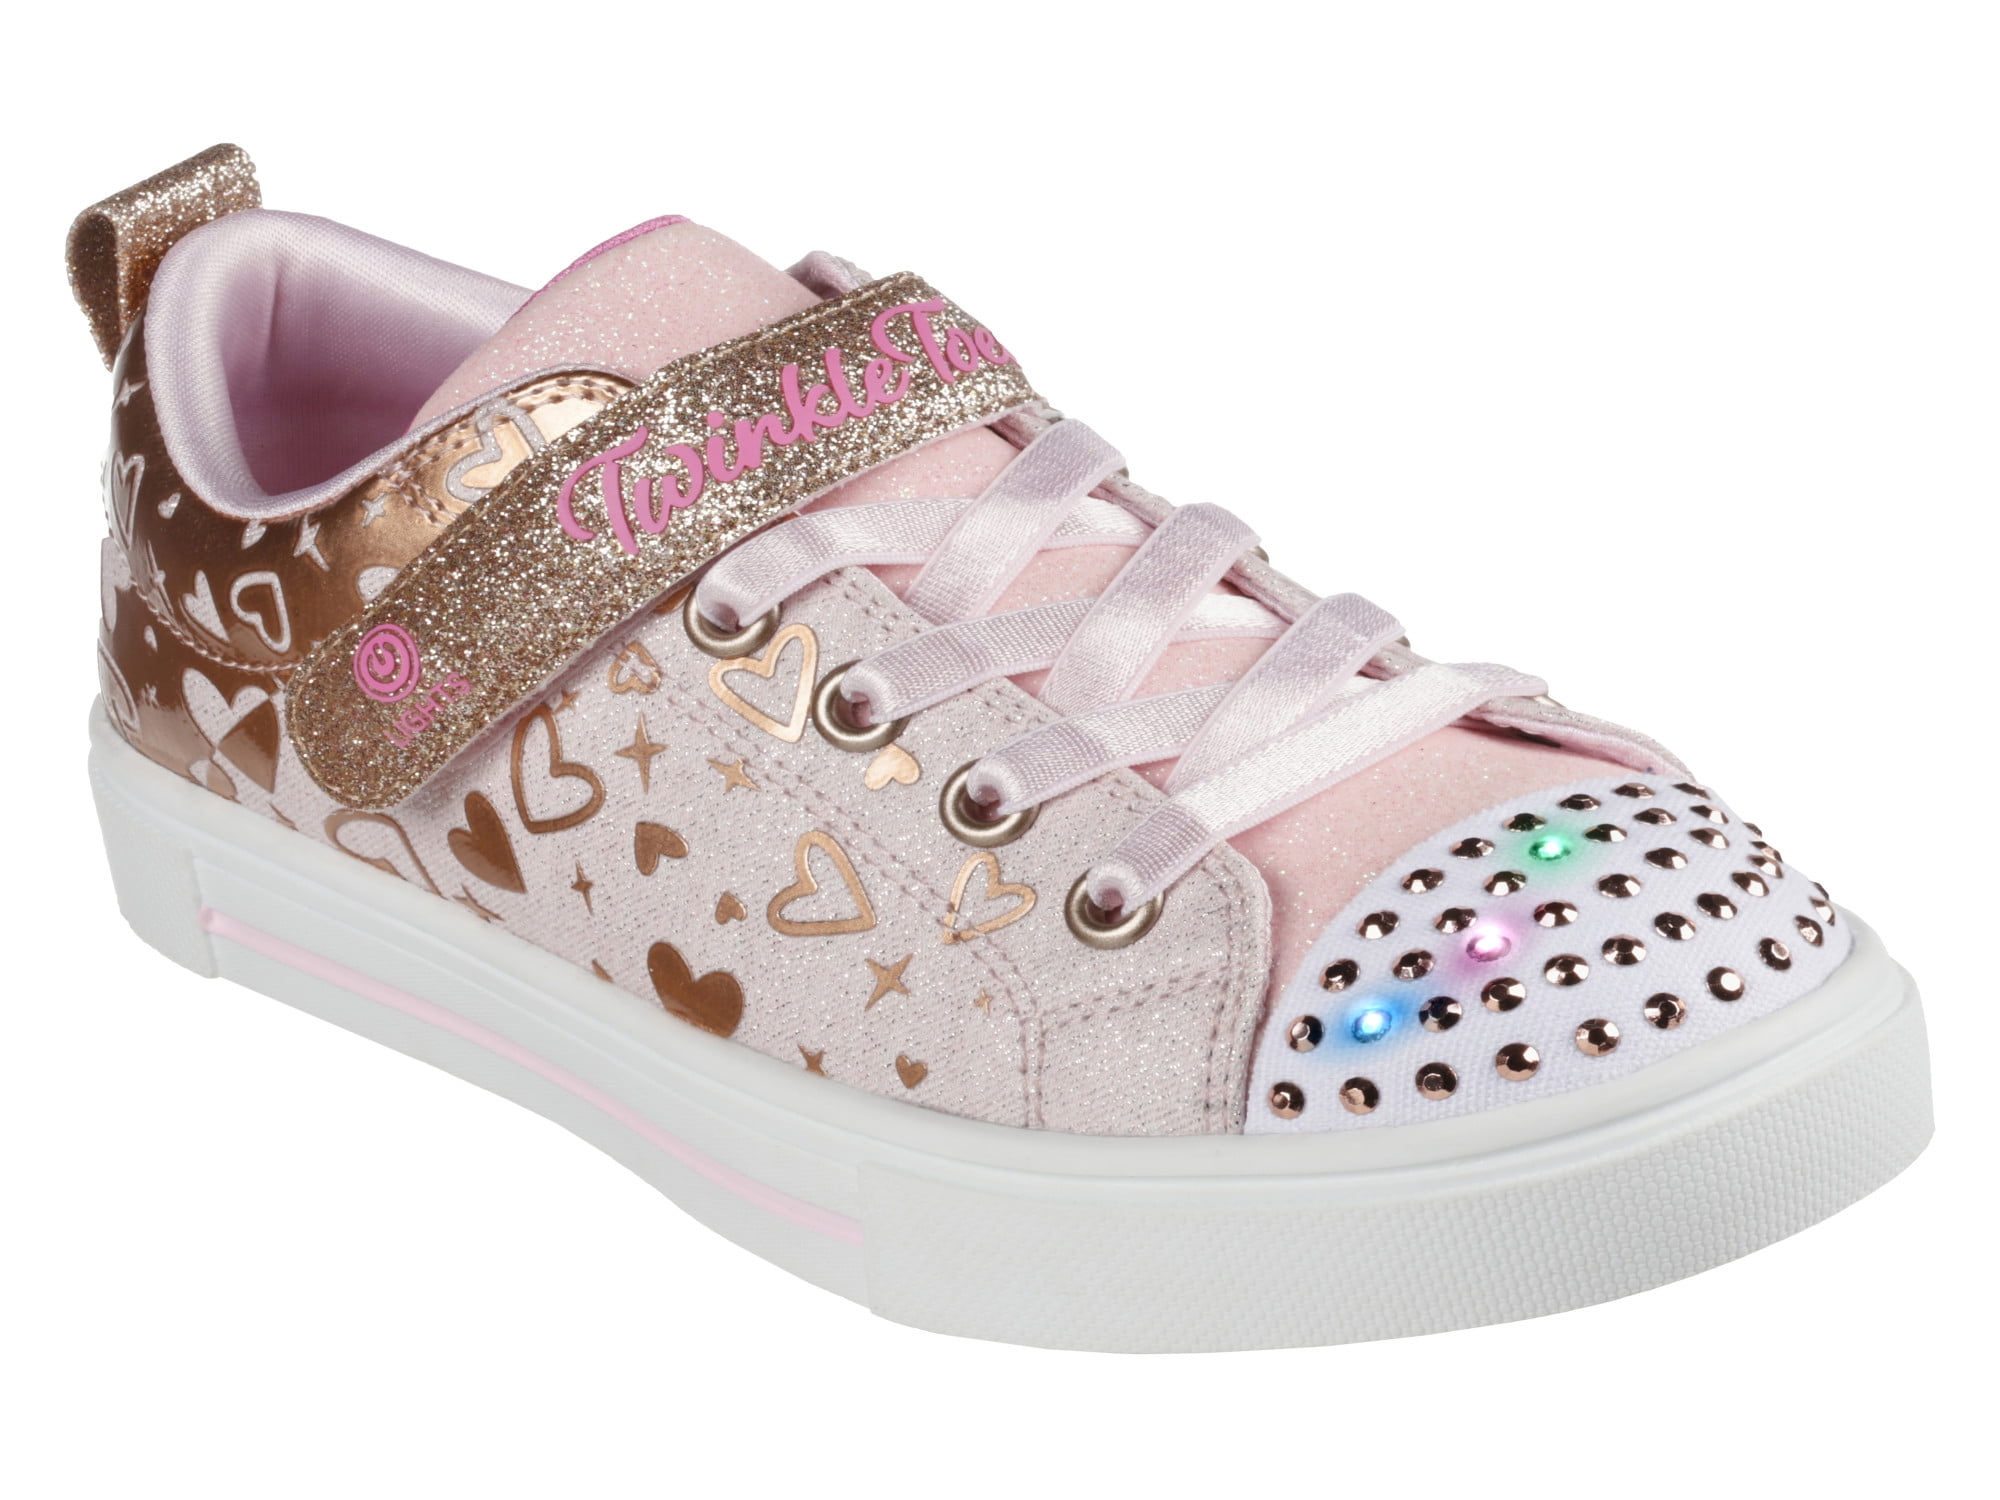 Skechers Girls Youth Twinkle Toes Light Up Sneakers - Heather Charm ...